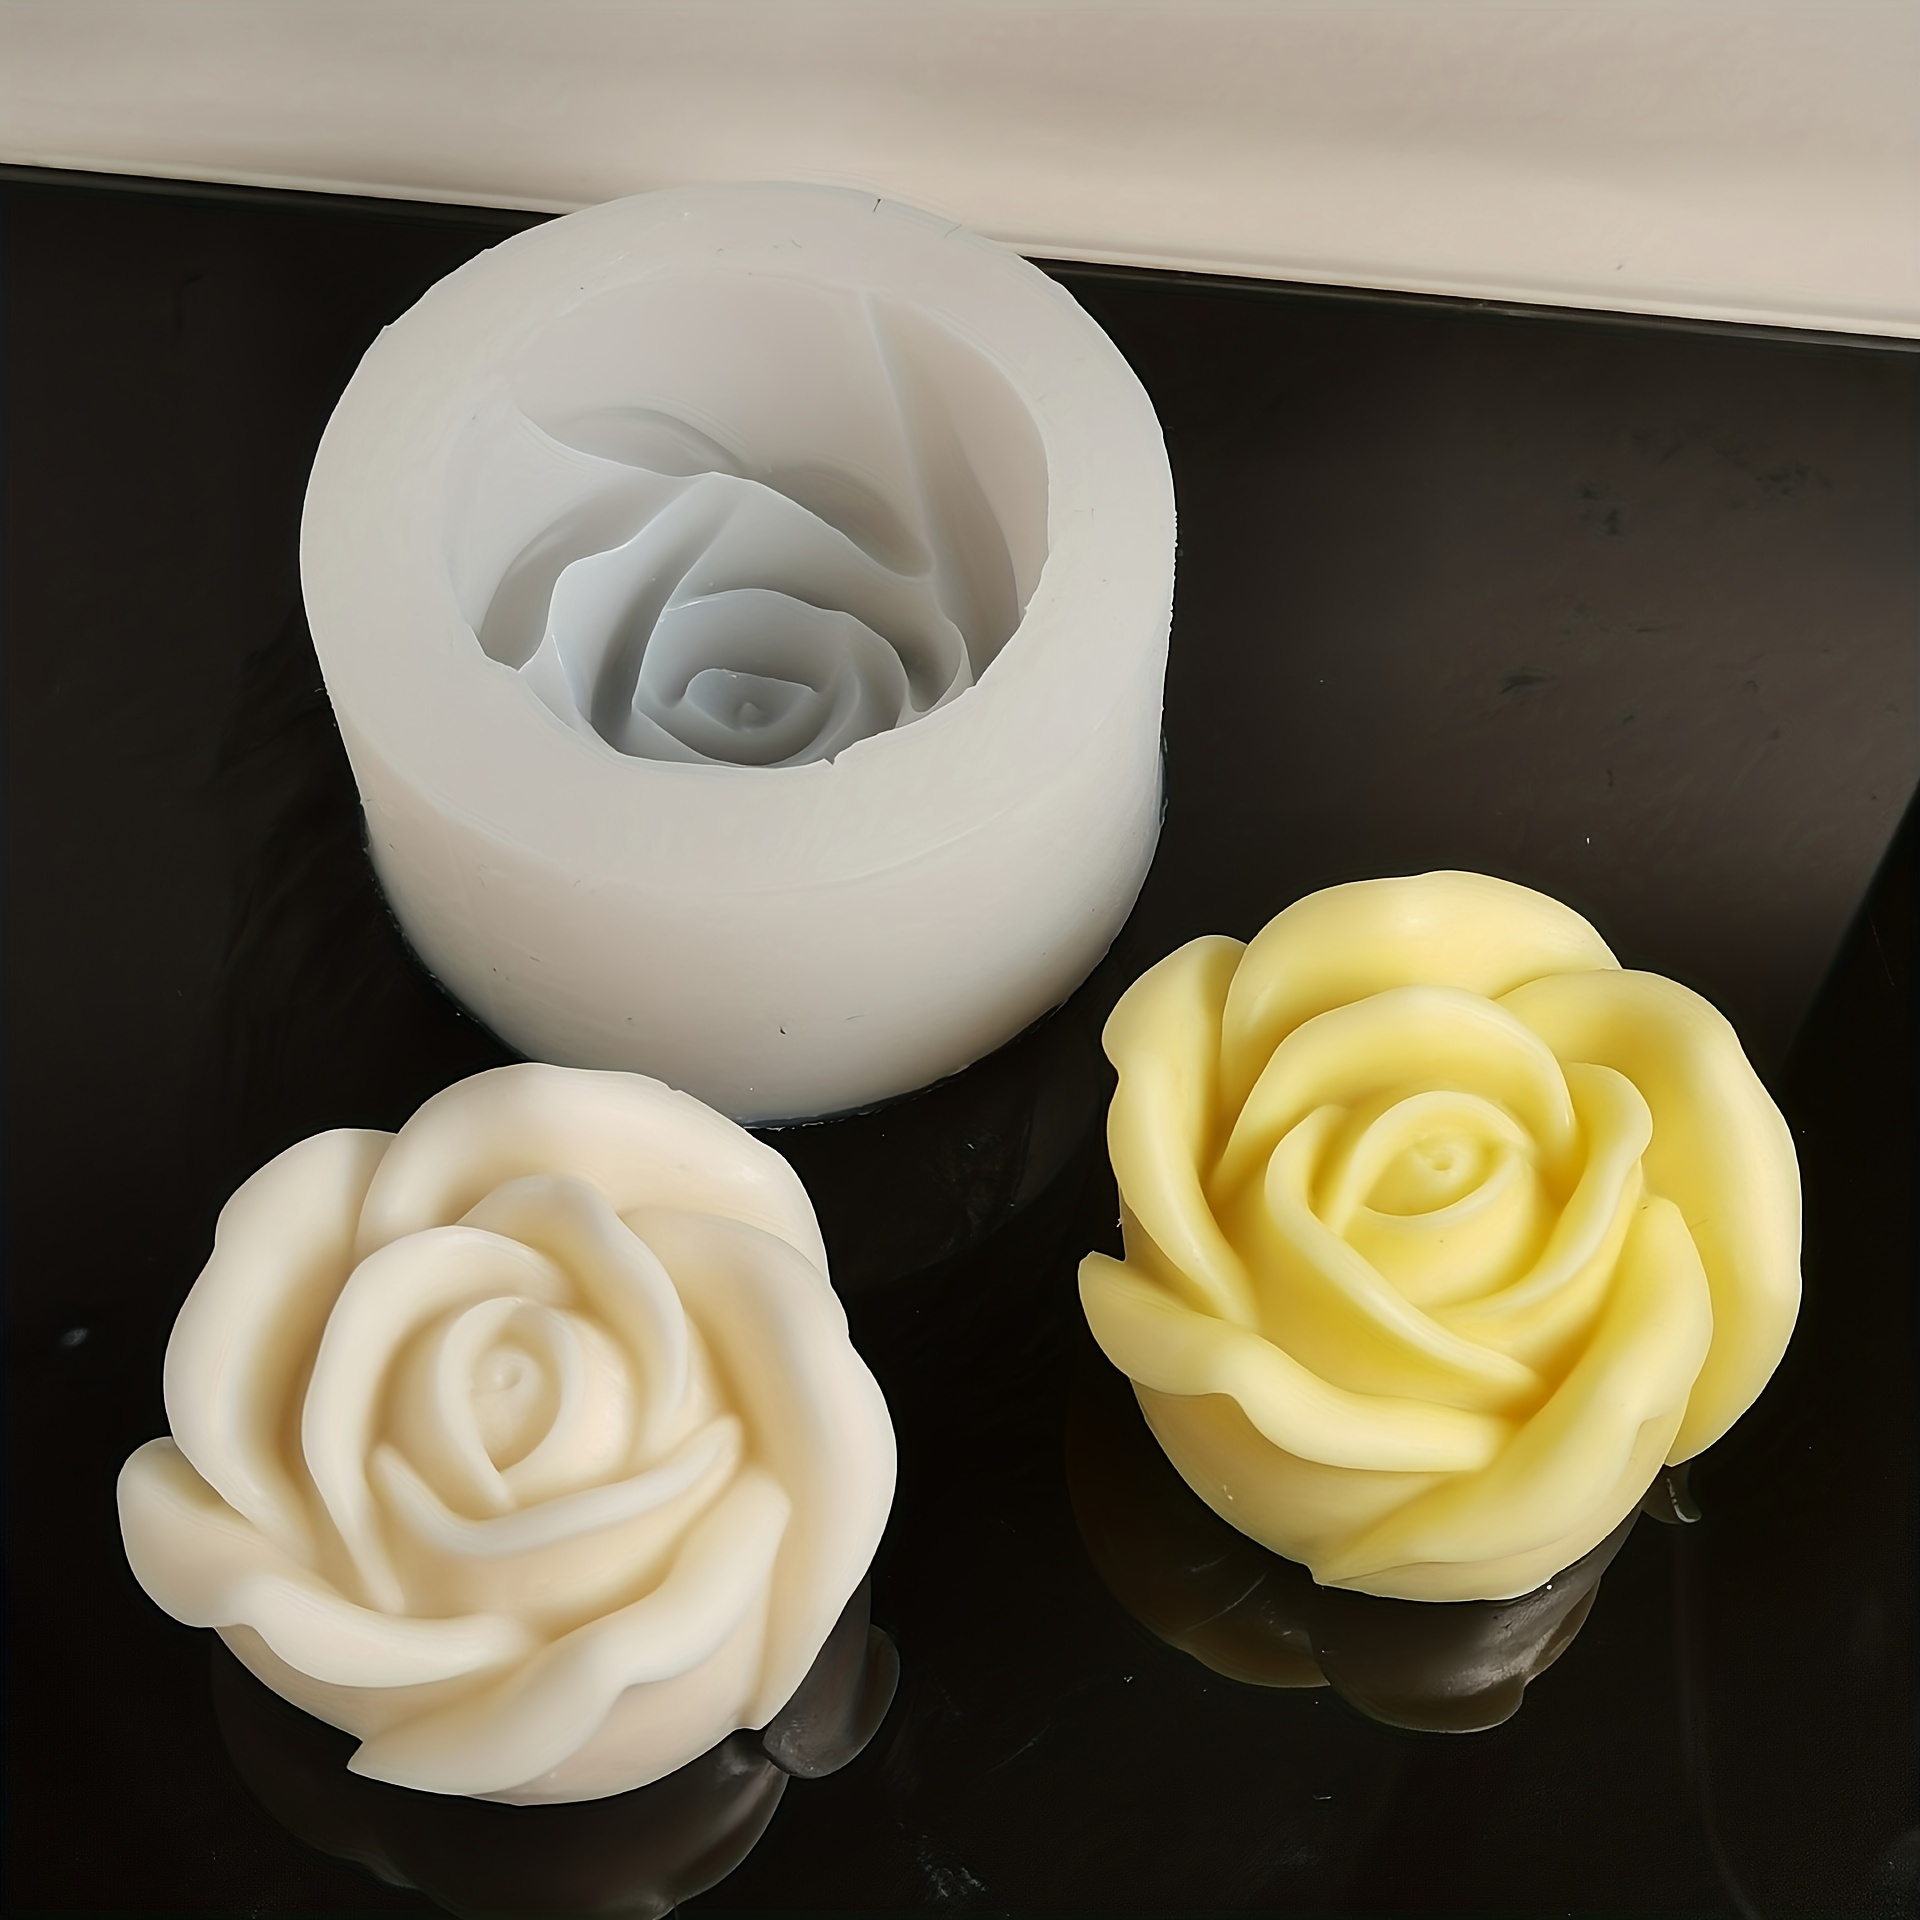 

Rose-shaped Silicone Mold For Candles, Aromatherapy Gypsum, Car Decor, Cake Baking & Handmade Soaps - Oval Fantasy Craft Tool Candle Molds Silicone Silicone Candle Molds